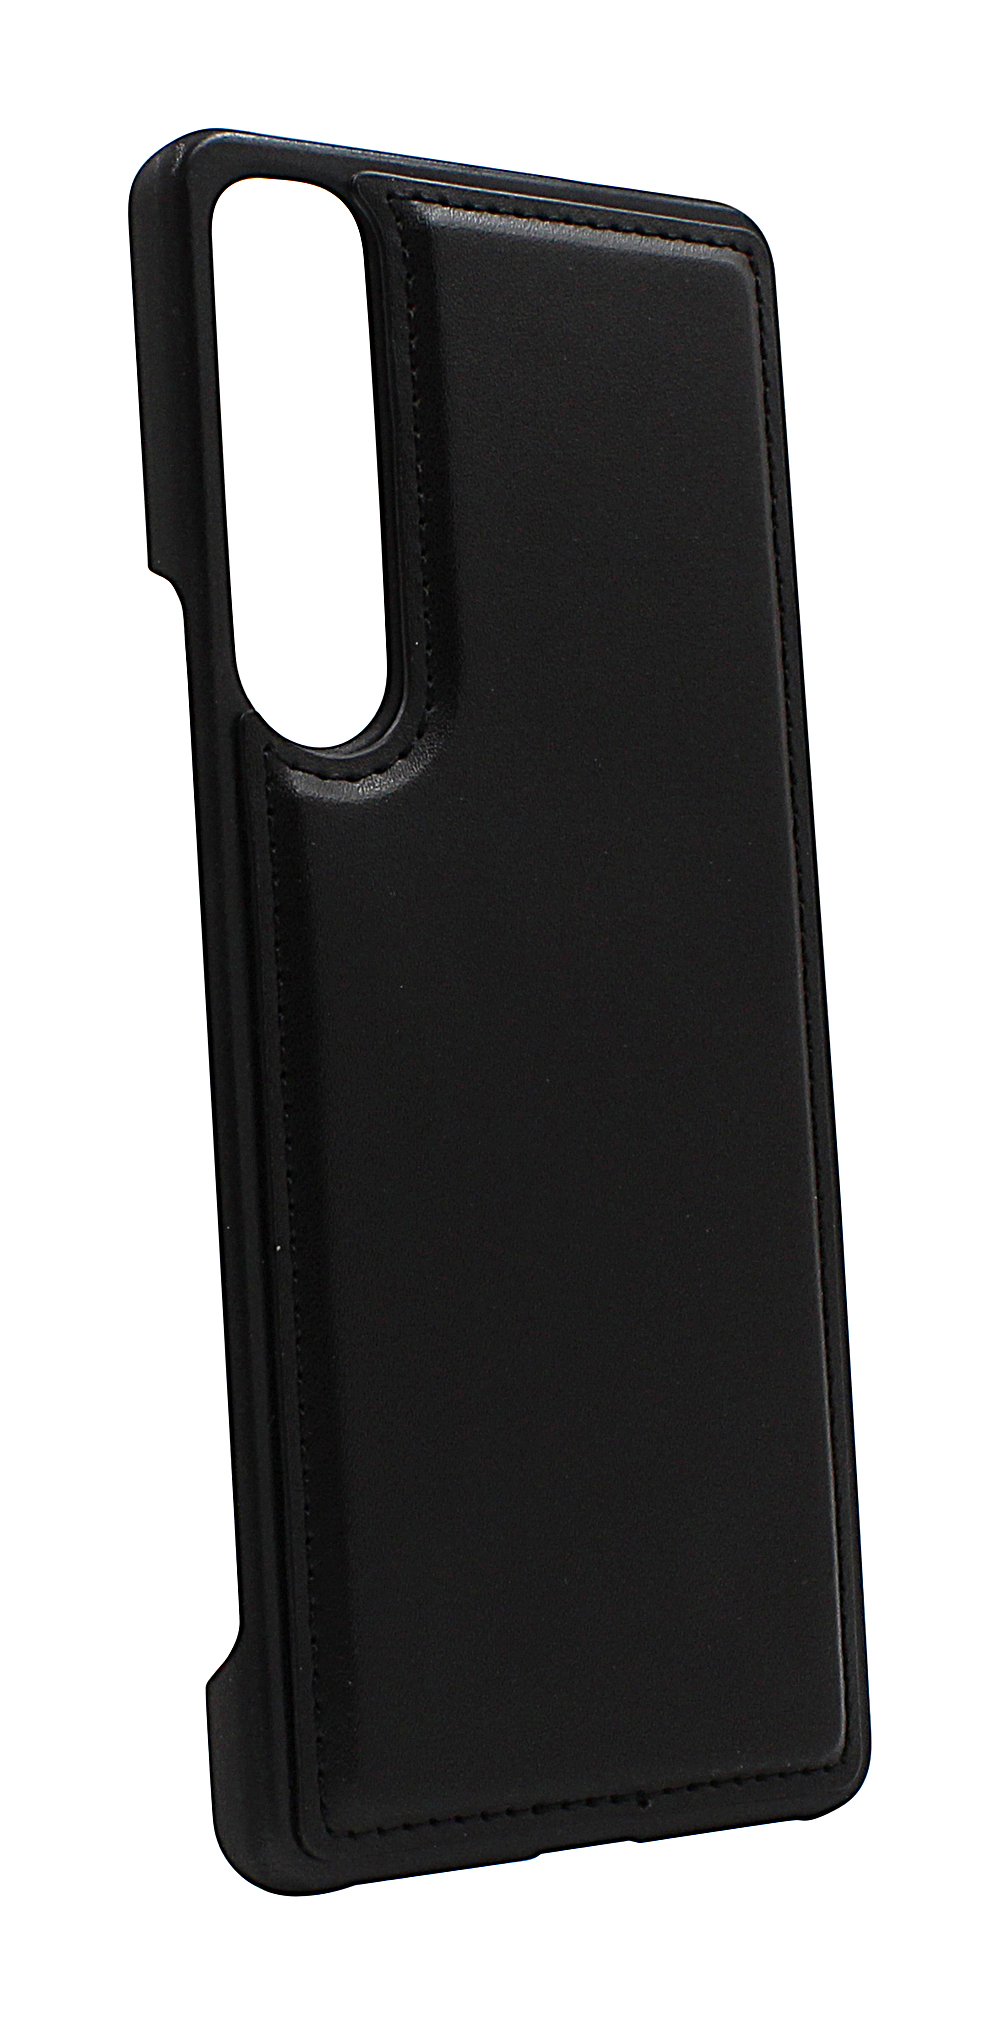 Magnet Cover Sony Xperia 1 IV (XQ-CT54)